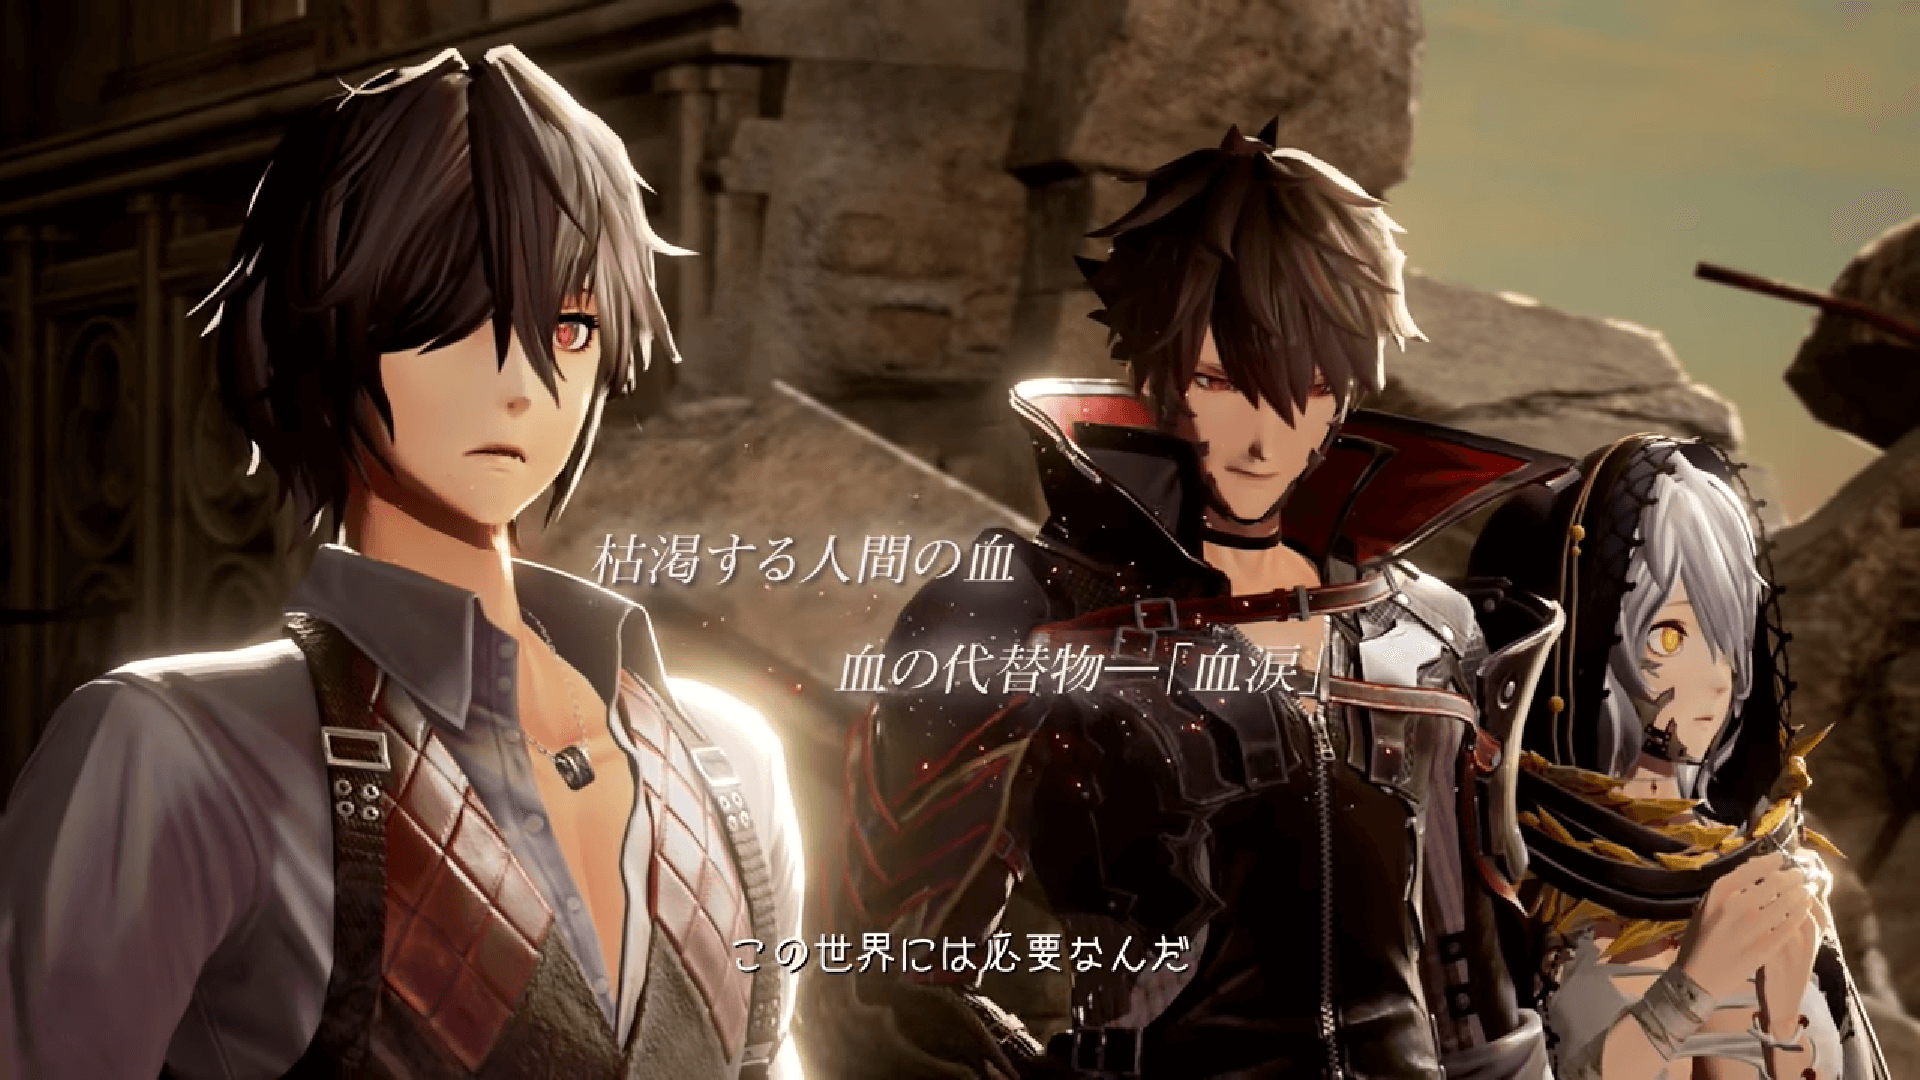 CODE VEIN Releases Gameplay Footage from Anime Expo 2017